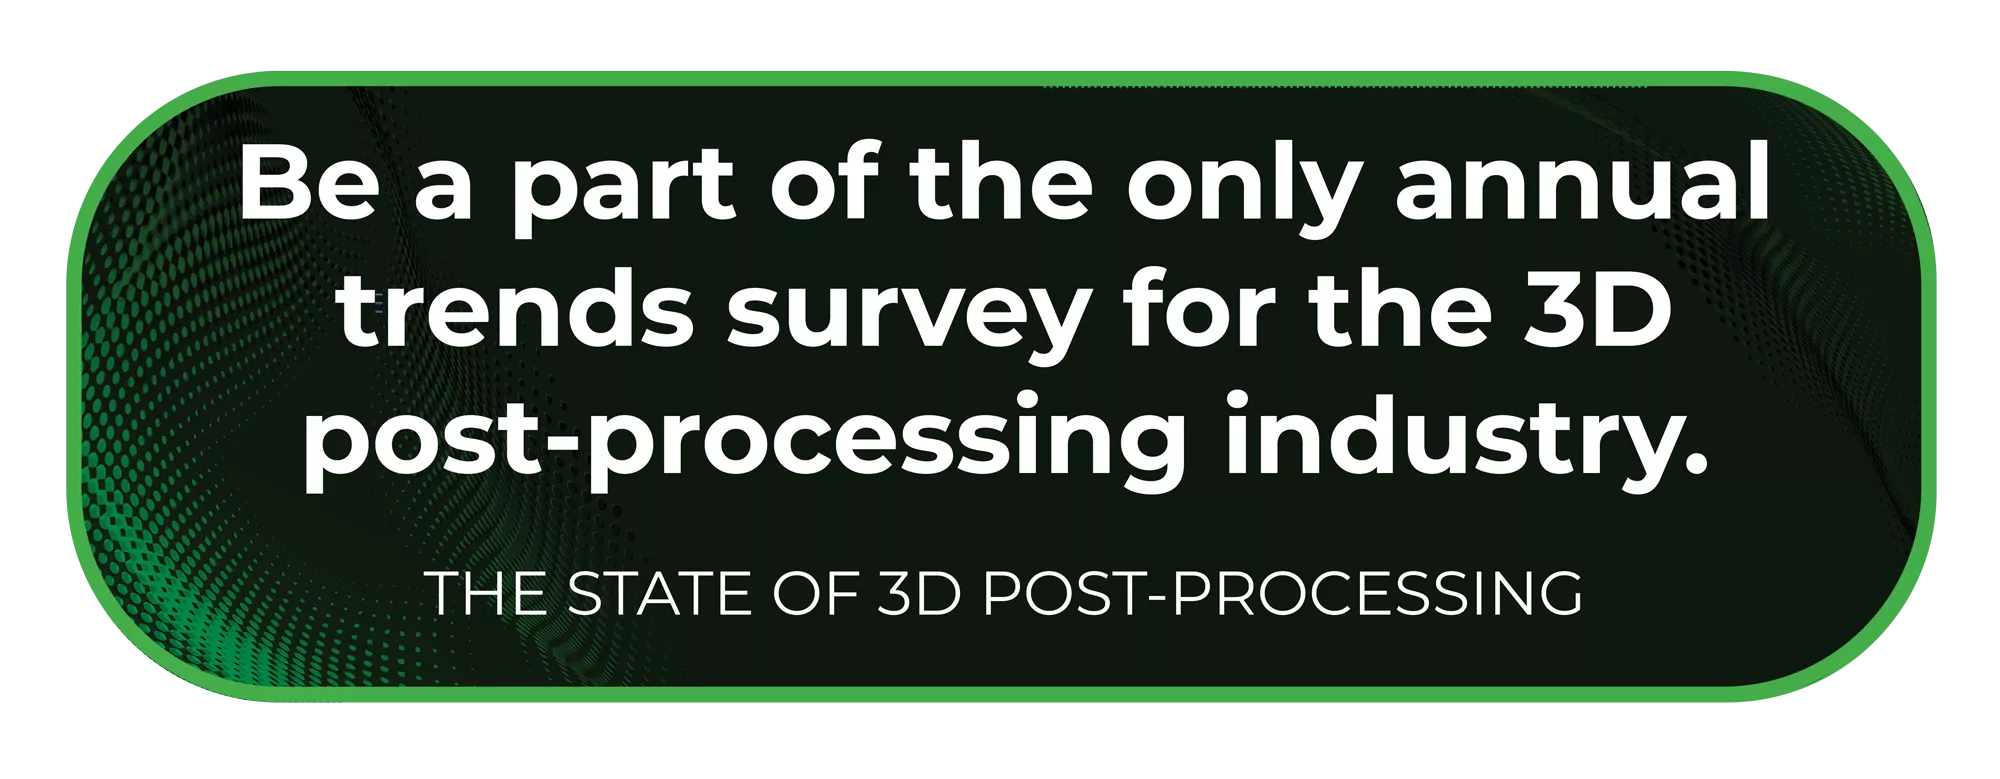 Be part of the only annual trends survey for the 3D post-processing industry.